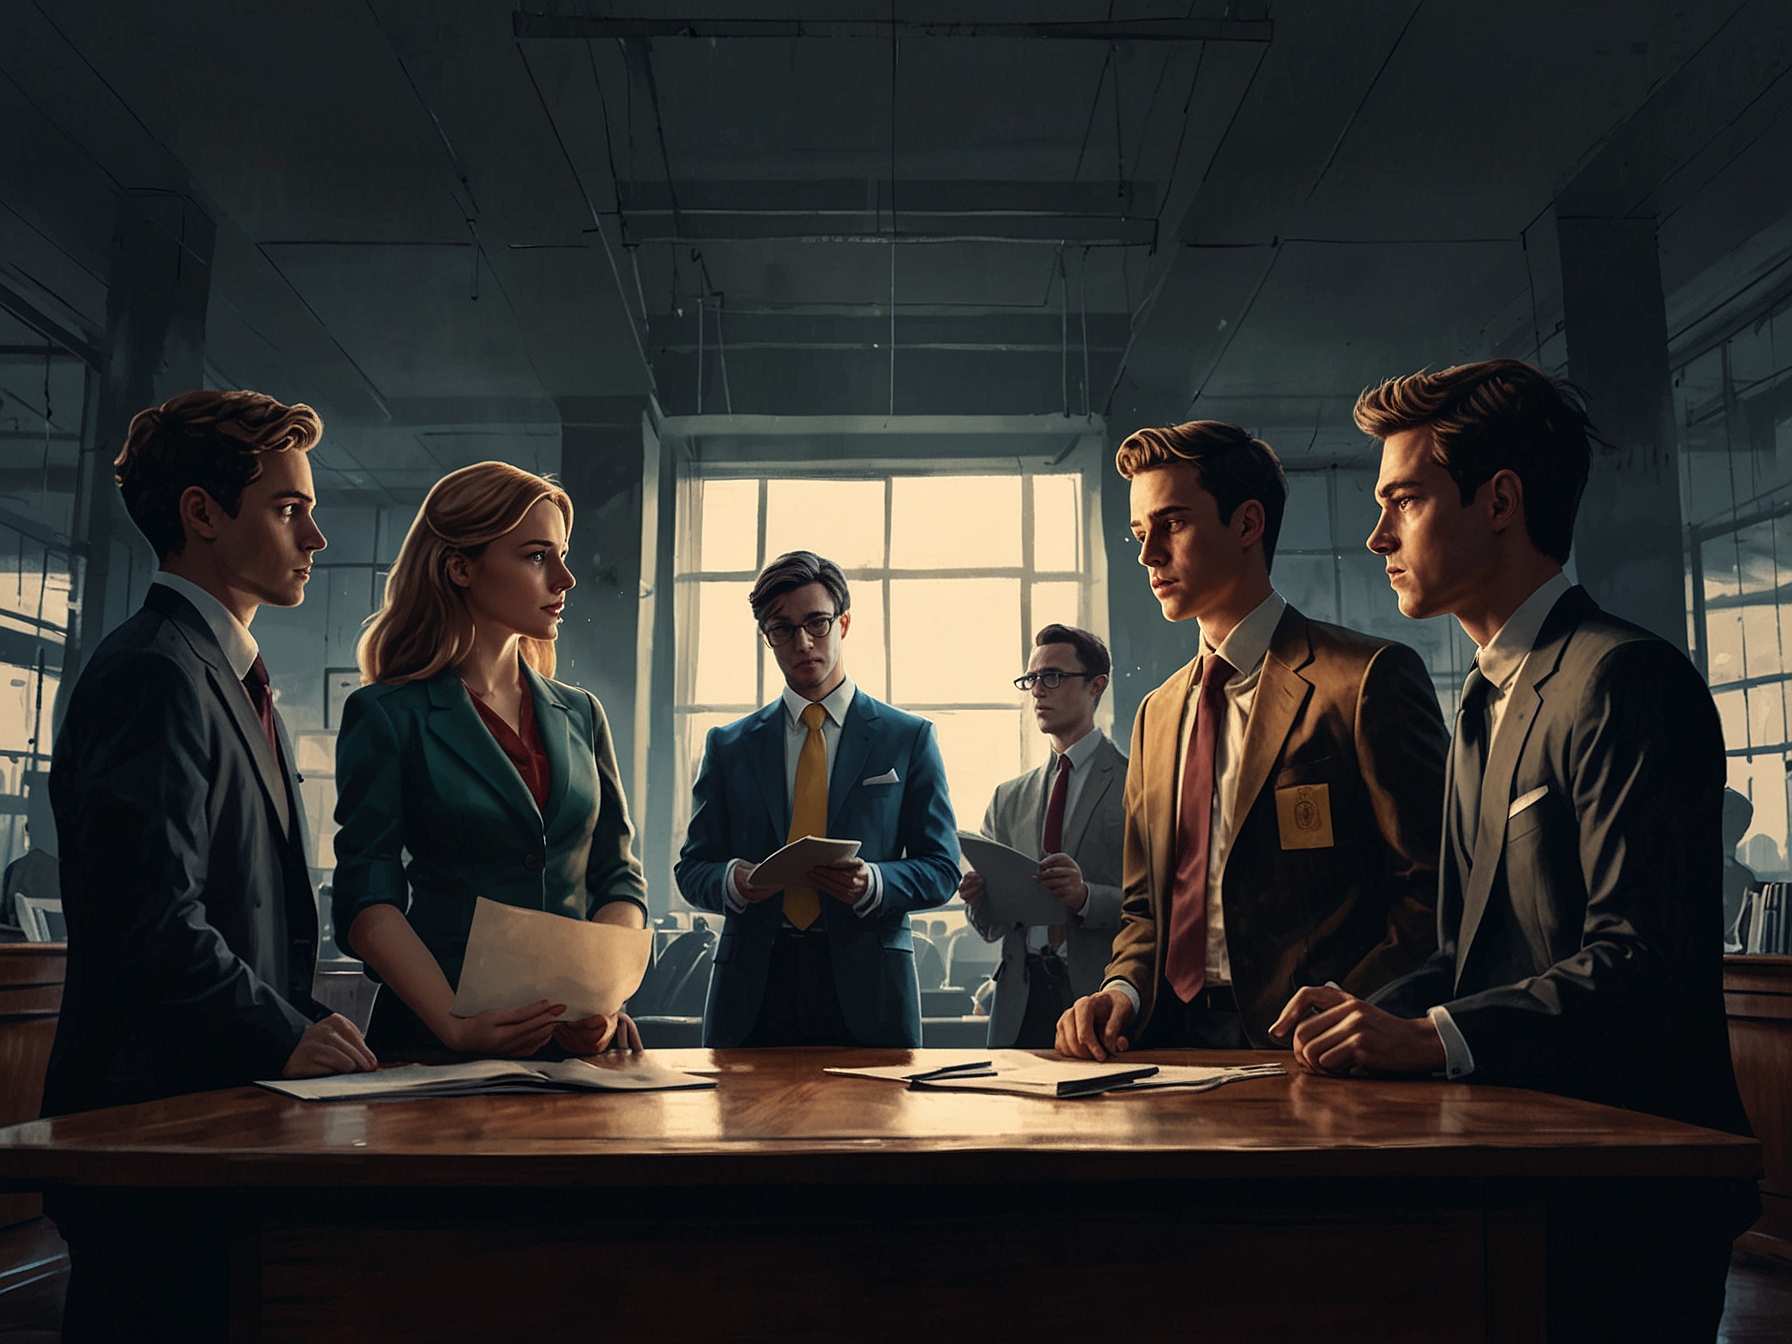 Illustration showing a group of young graduates in a high-stakes banking environment, highlighting the intense and competitive nature of the finance sector as depicted in the drama series Industry.